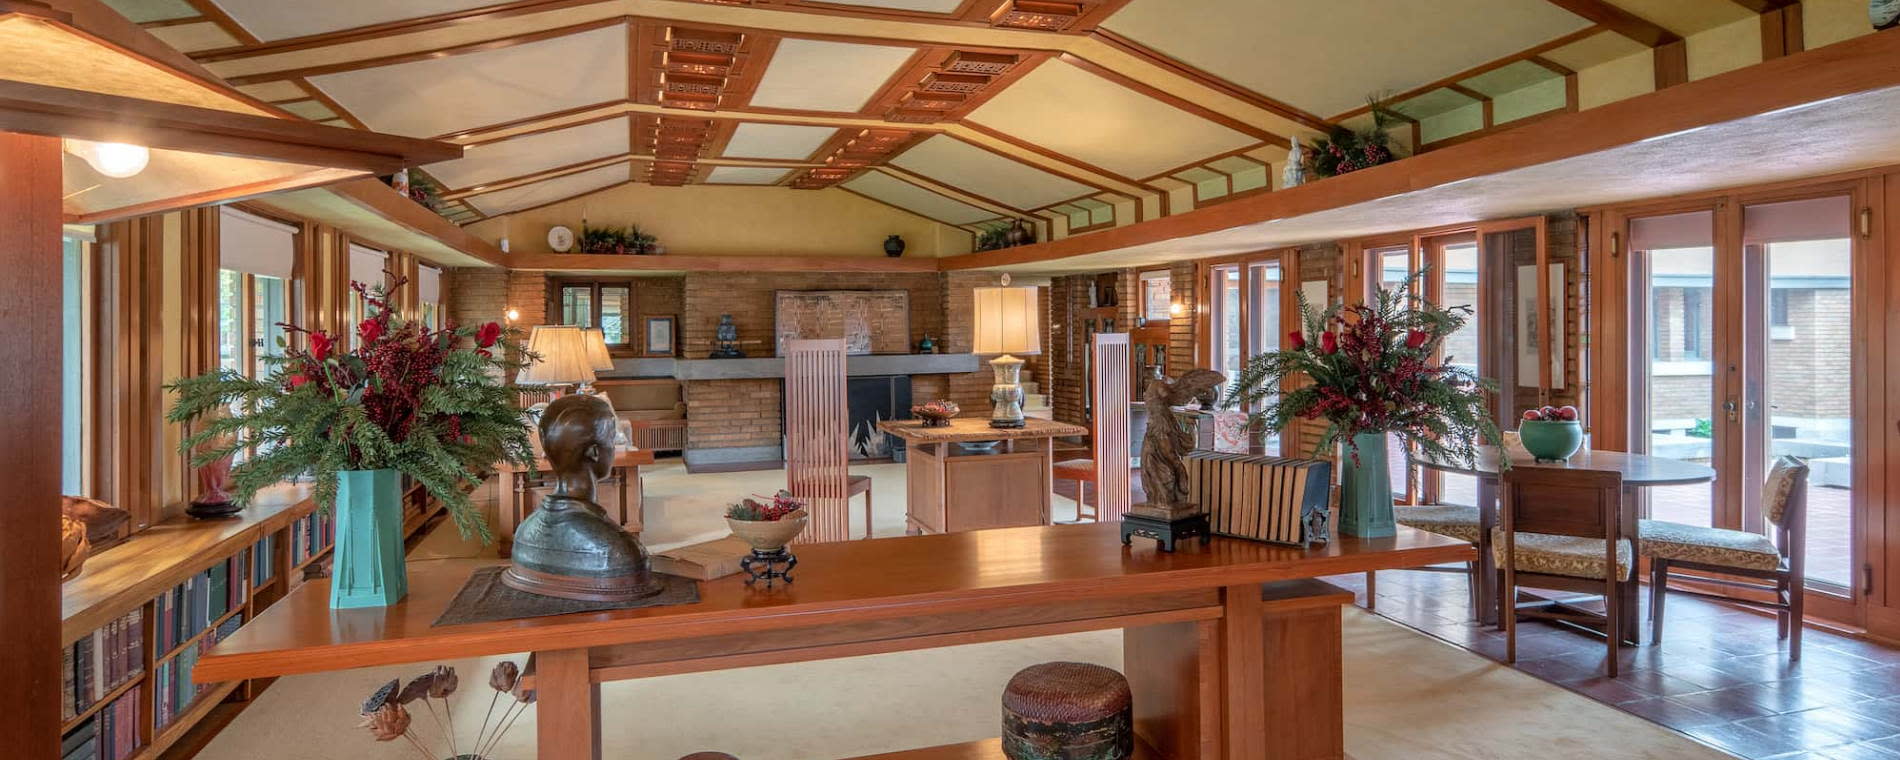 Living Room at Frank Lloyd Wright's Allen House in Wichita